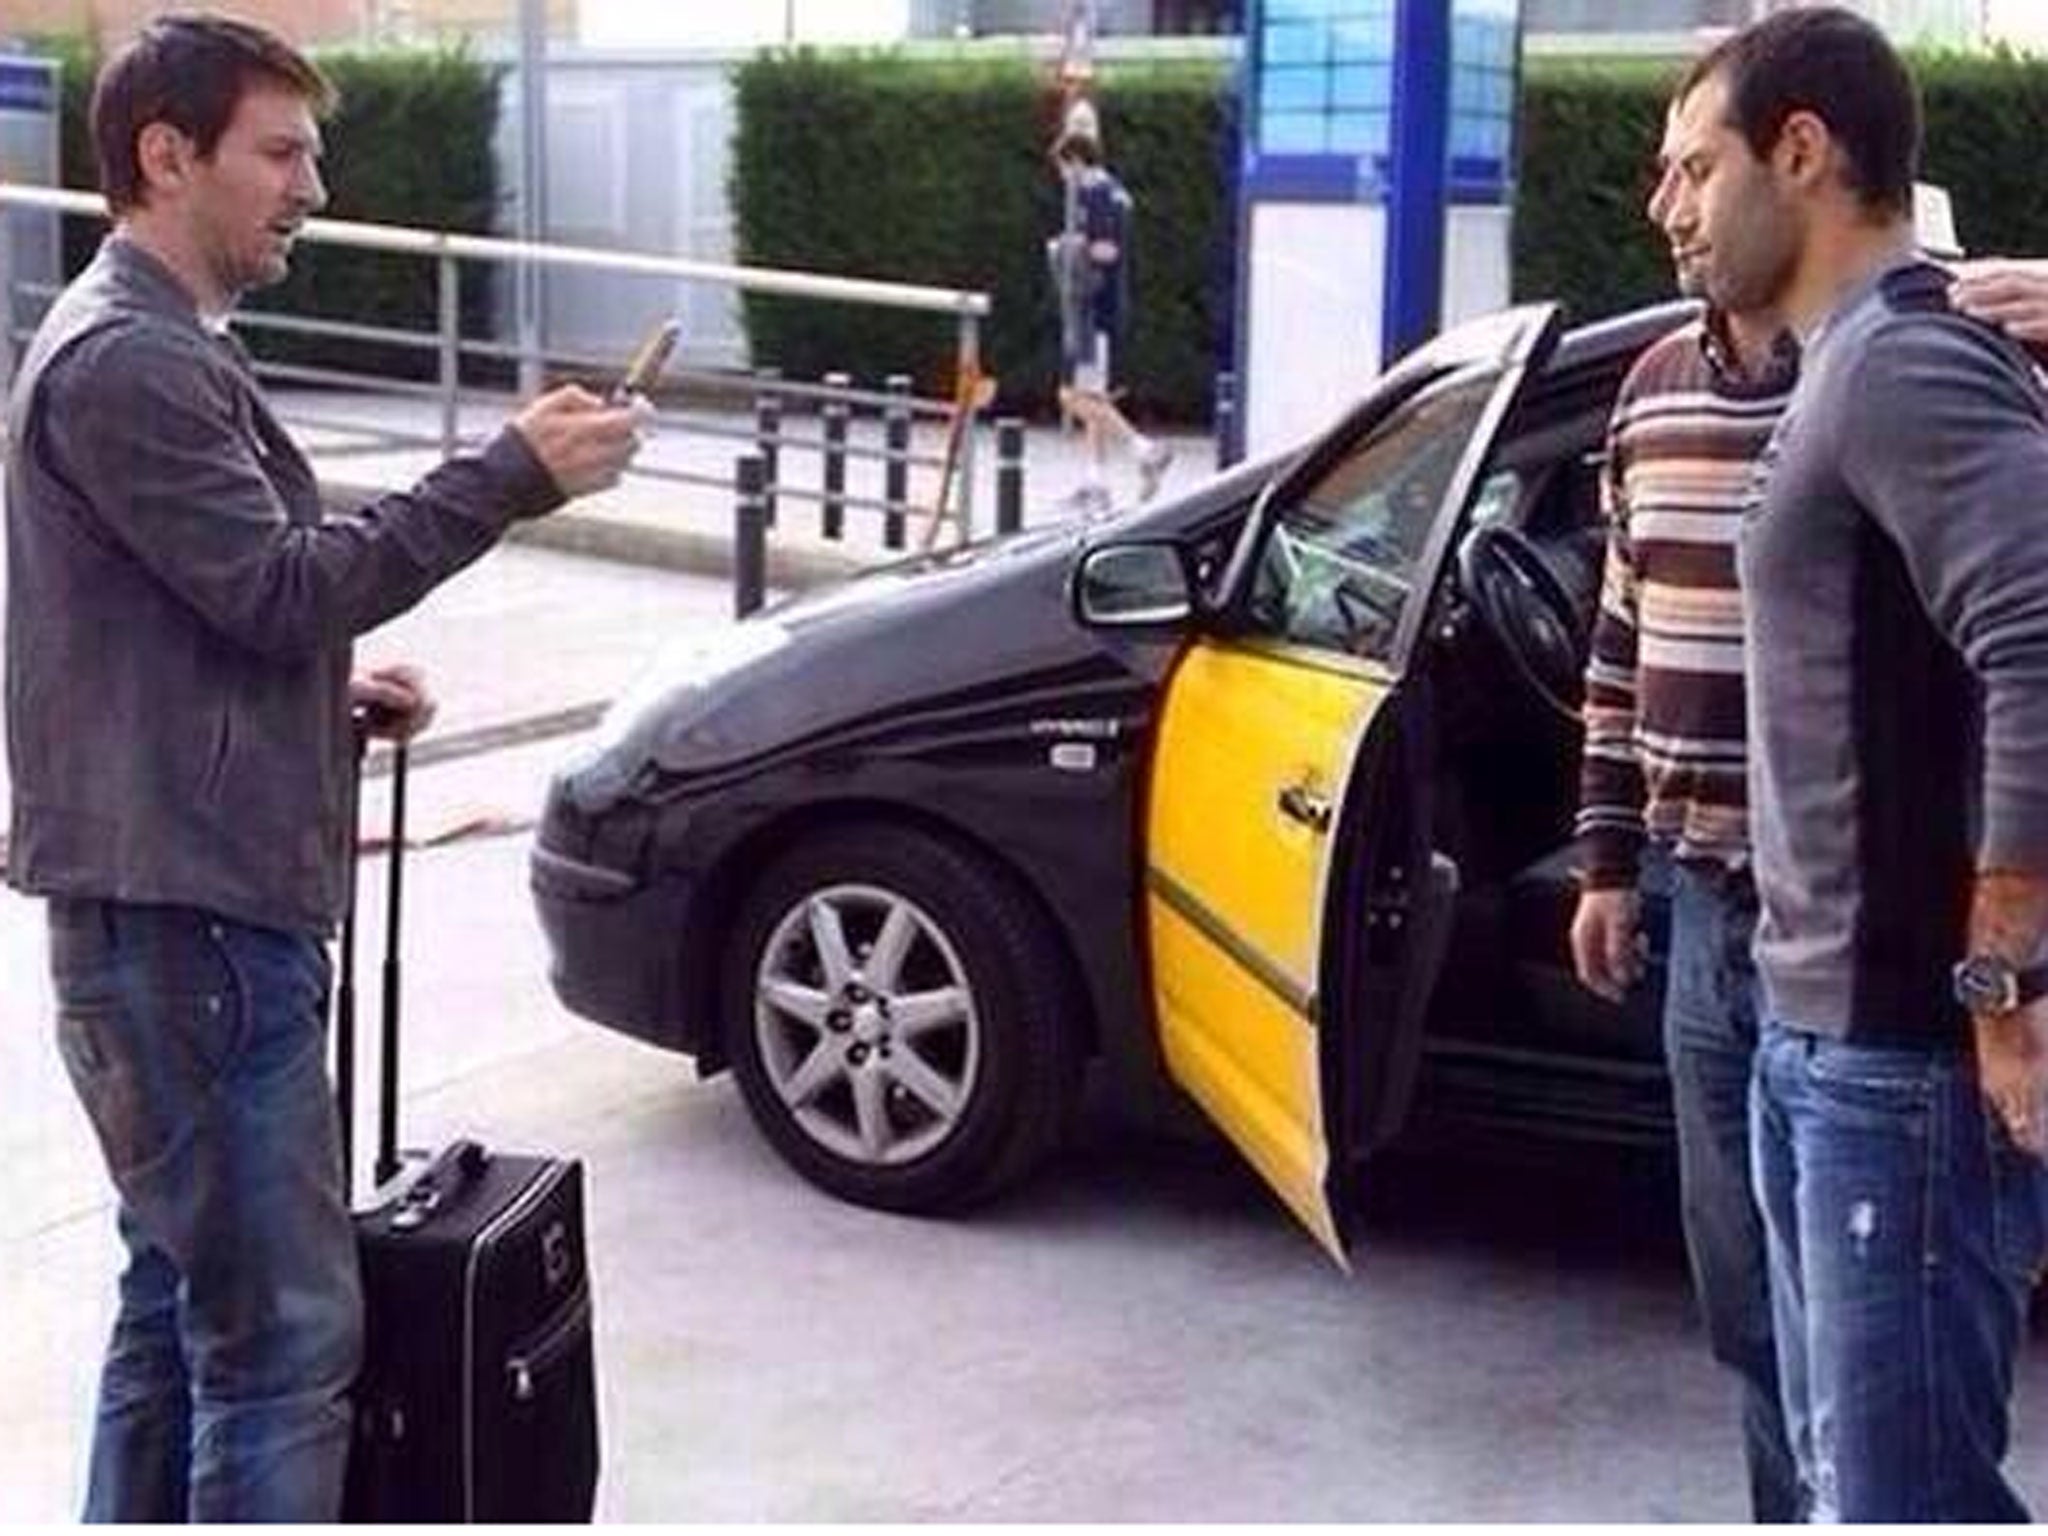 Lionel Messi takes a picture for Javier Mascherano and a fan